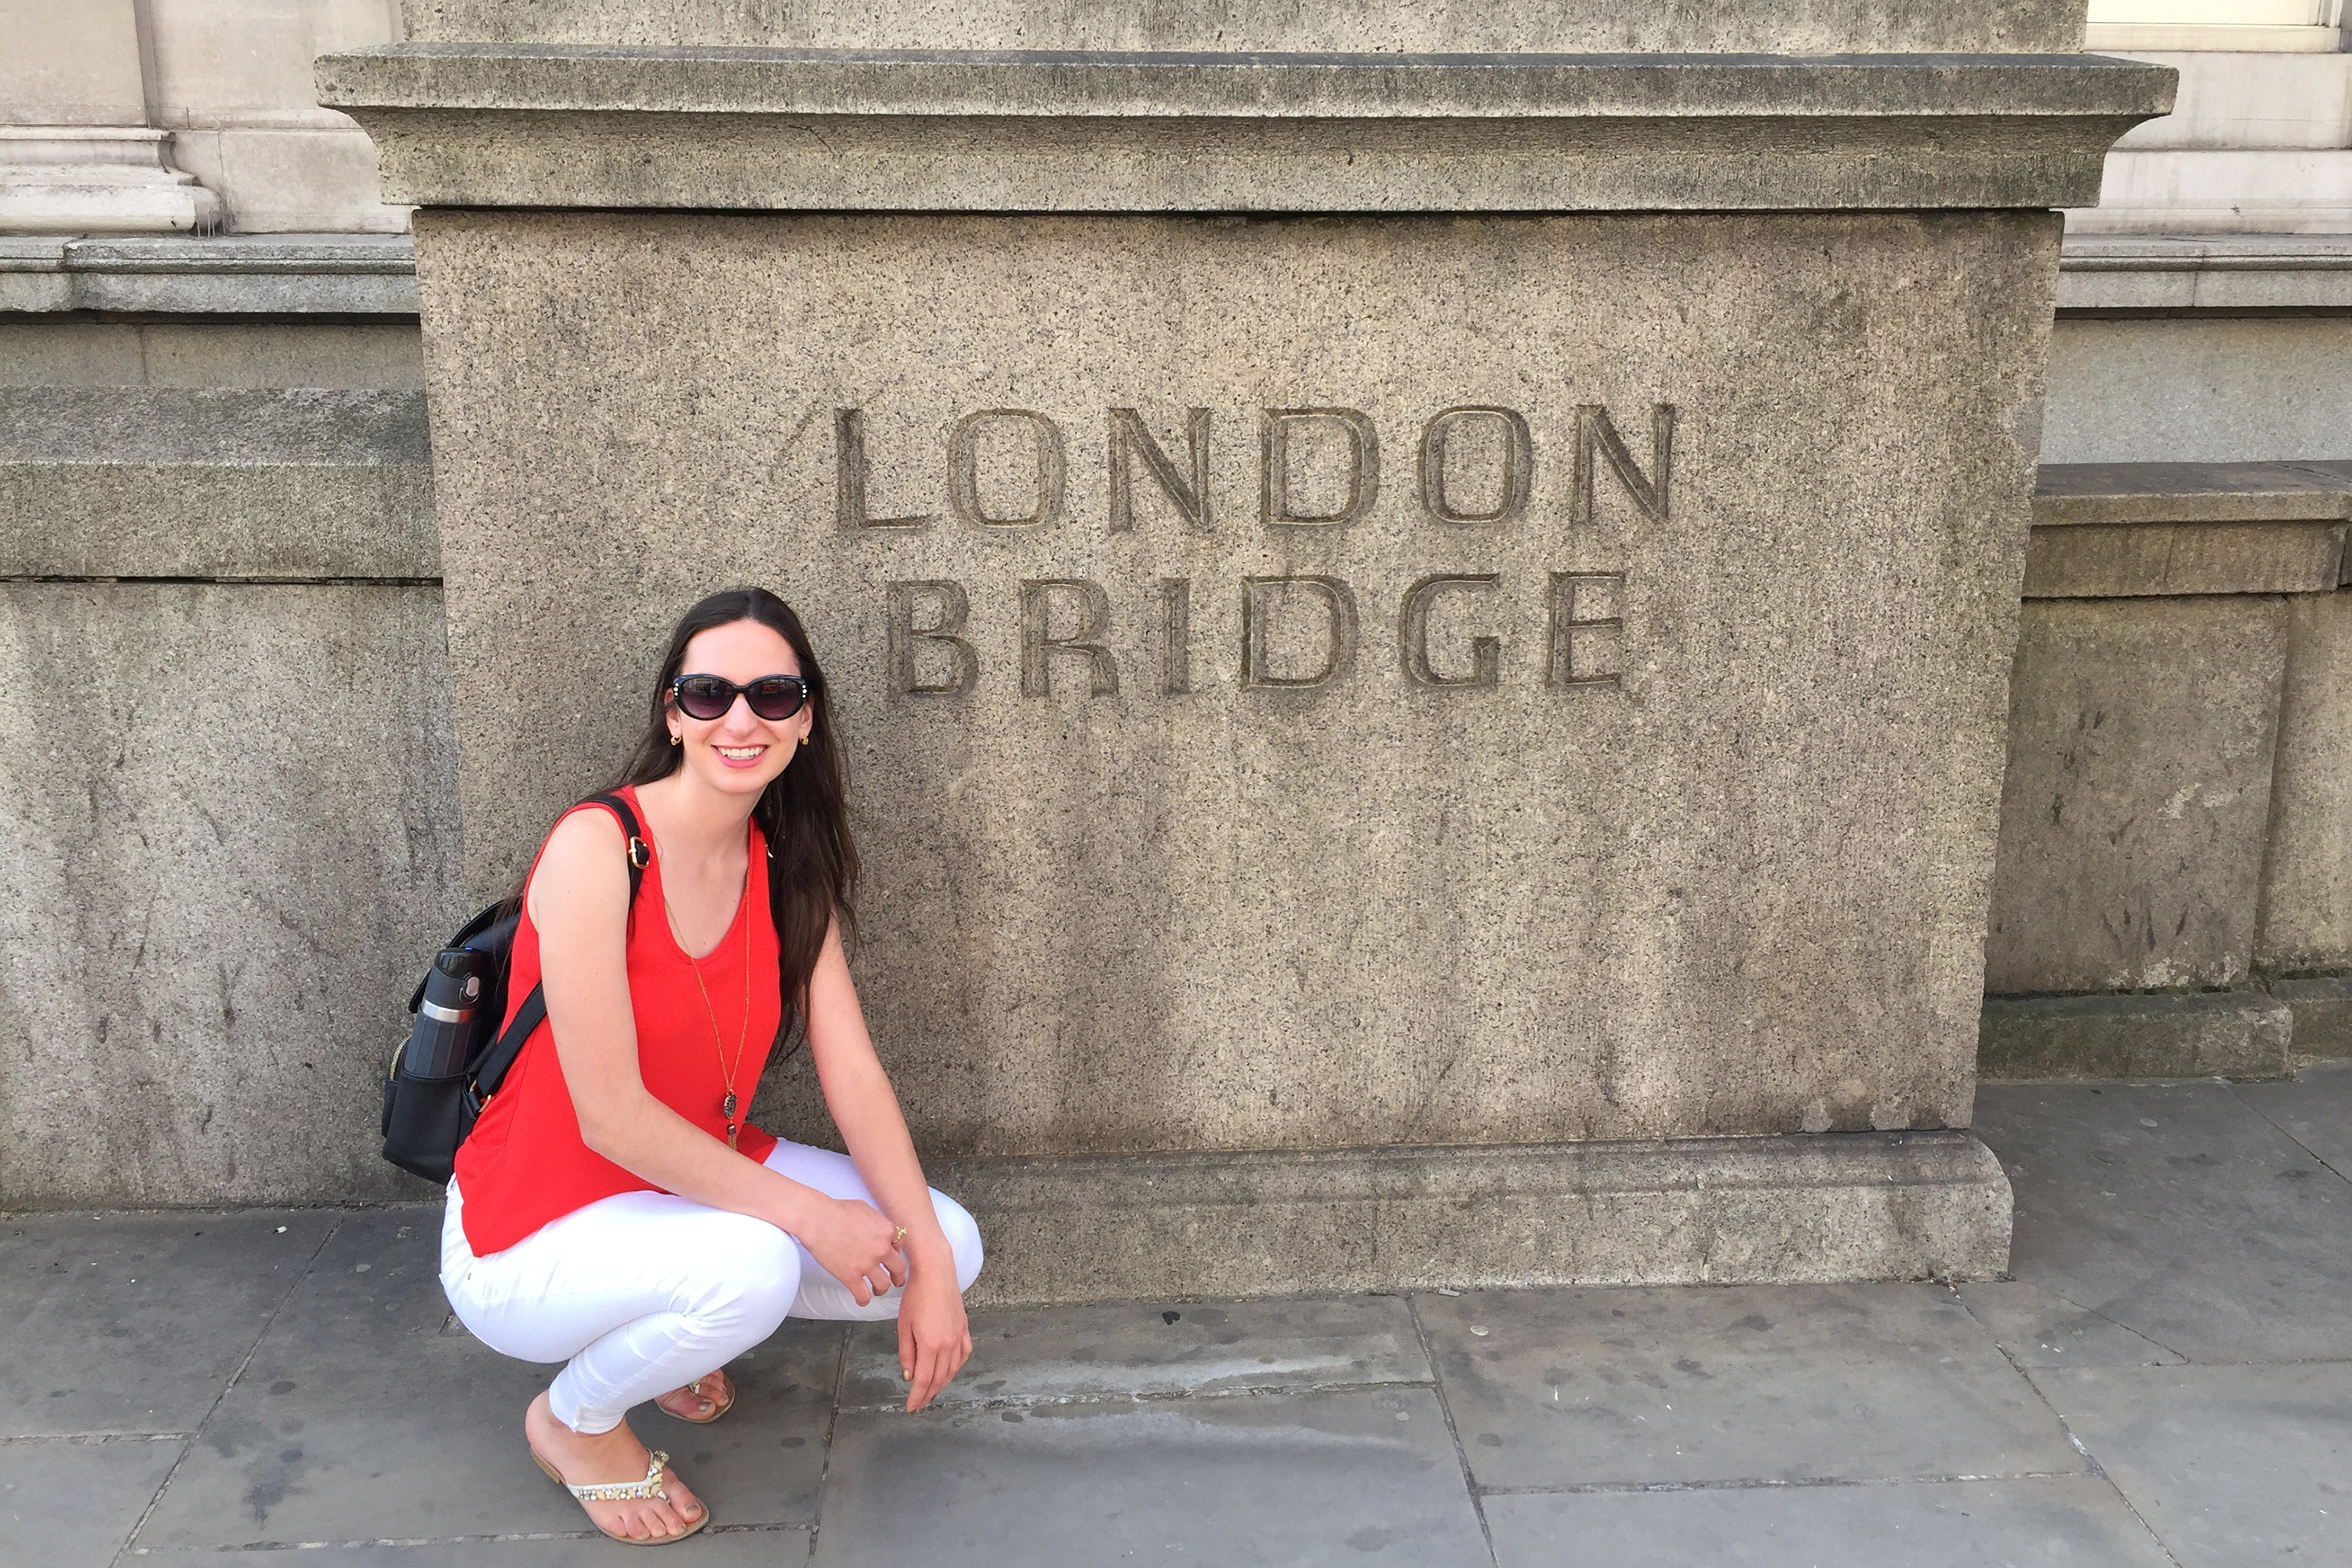 Anna Zarra Aldrich '20 (CLAS) at London Bridge during her Education Abroad experience in summer 2018.